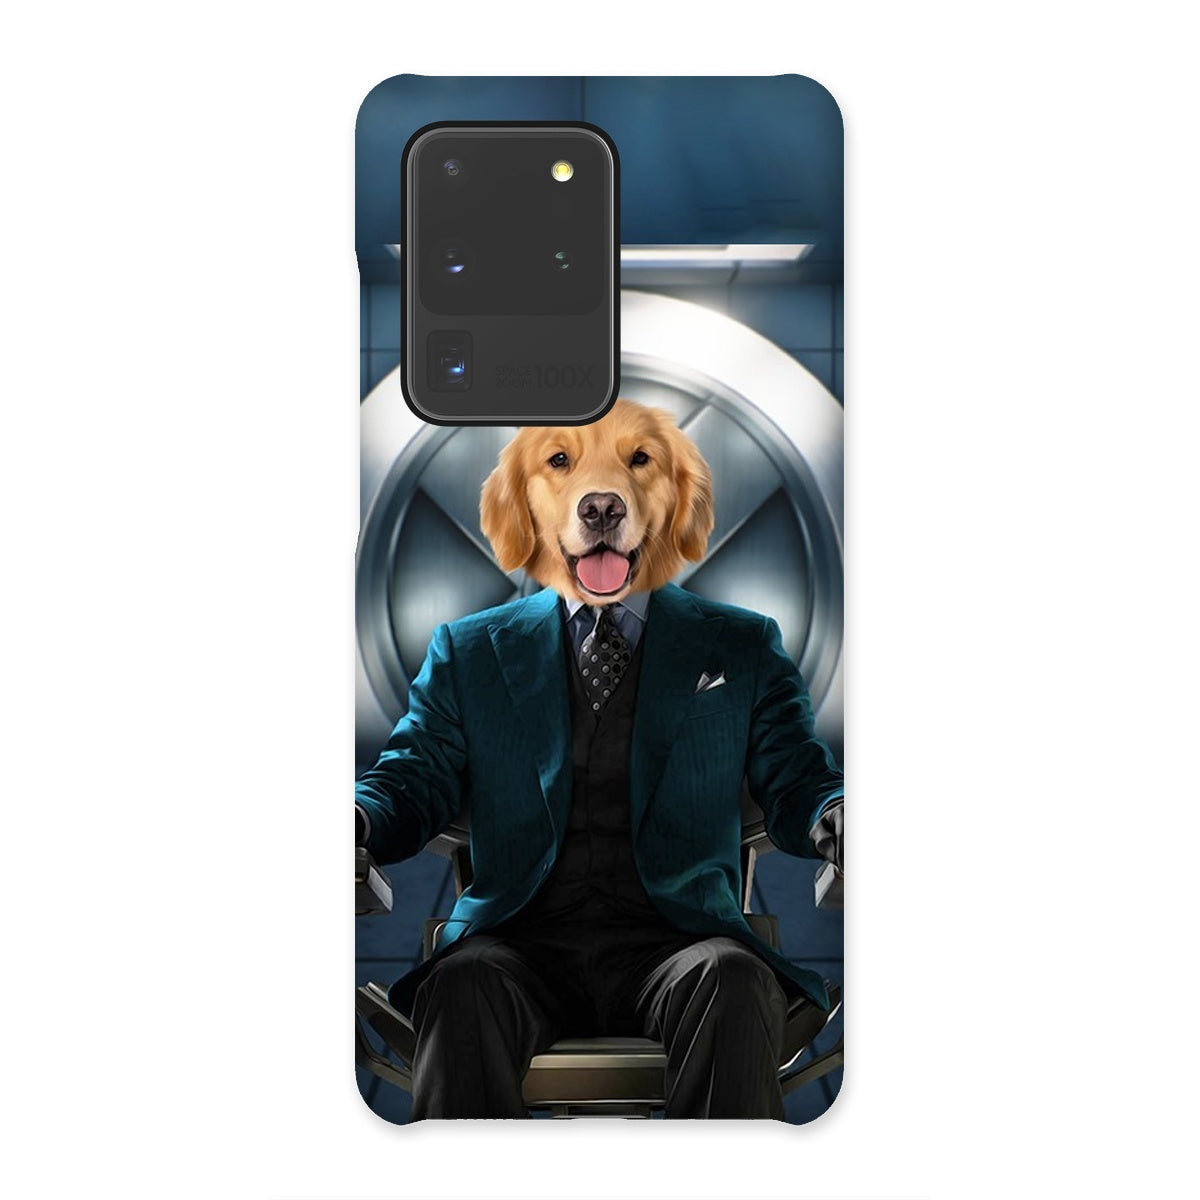  dog phone case custom, custom dog photo canvas, dog on phone case, dog portraits with clothes, Pet gifts, painted picture of your dog, paw and glory, pawandgloryPurr and mutt, pet portraits in oil, painting of my dog, custom dogs phone case, paw prints gifts phone case, pet portrait in phone case, paw and glory, pawandglory